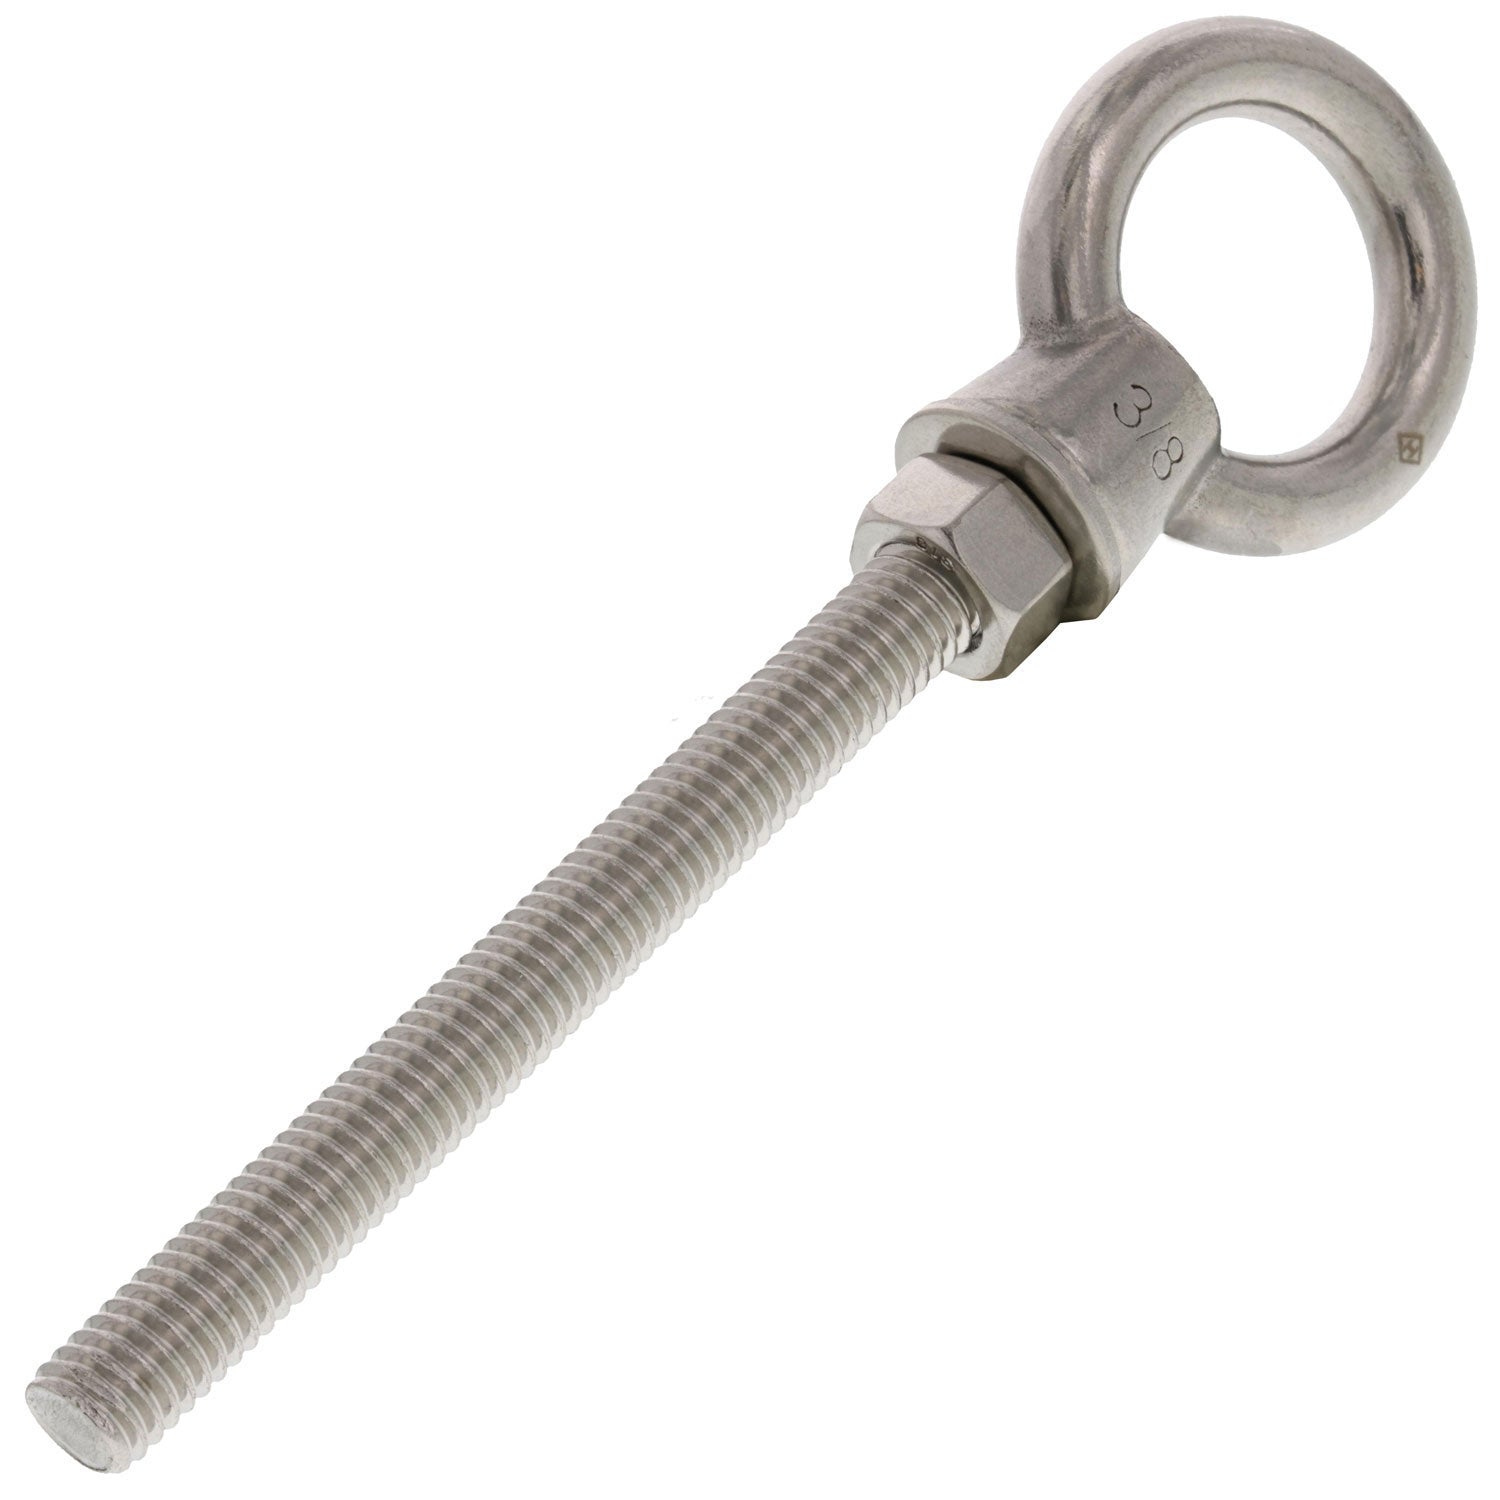 Type 316-1 x 9 L Stainless Steel Shoulder Eye Bolts